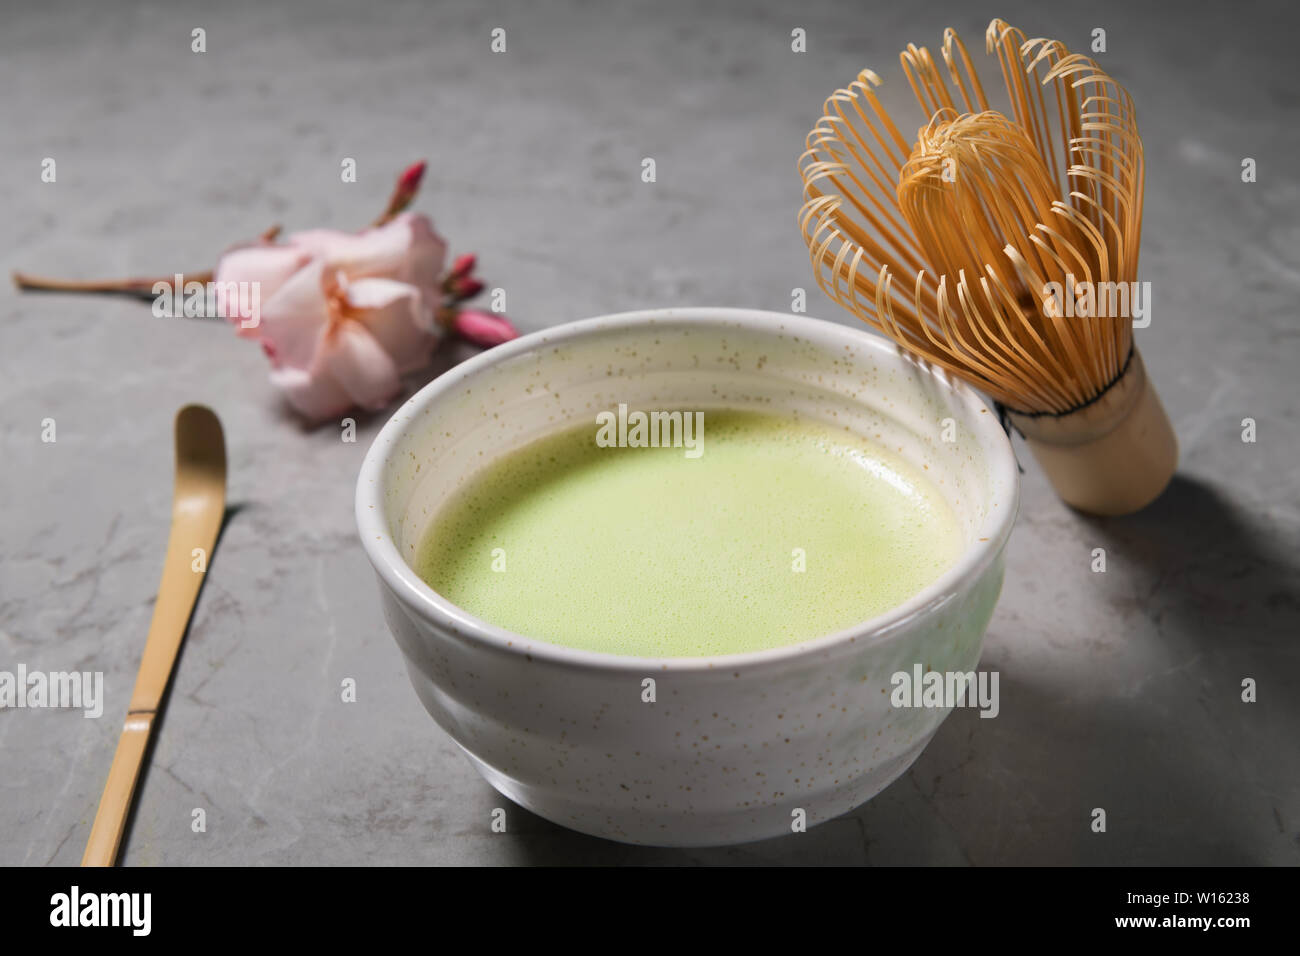 Ogranic green matcha tea drink and tea accessories - bamboo chesen on grey marble background. Japanese tea ceremony concept, close up Stock Photo